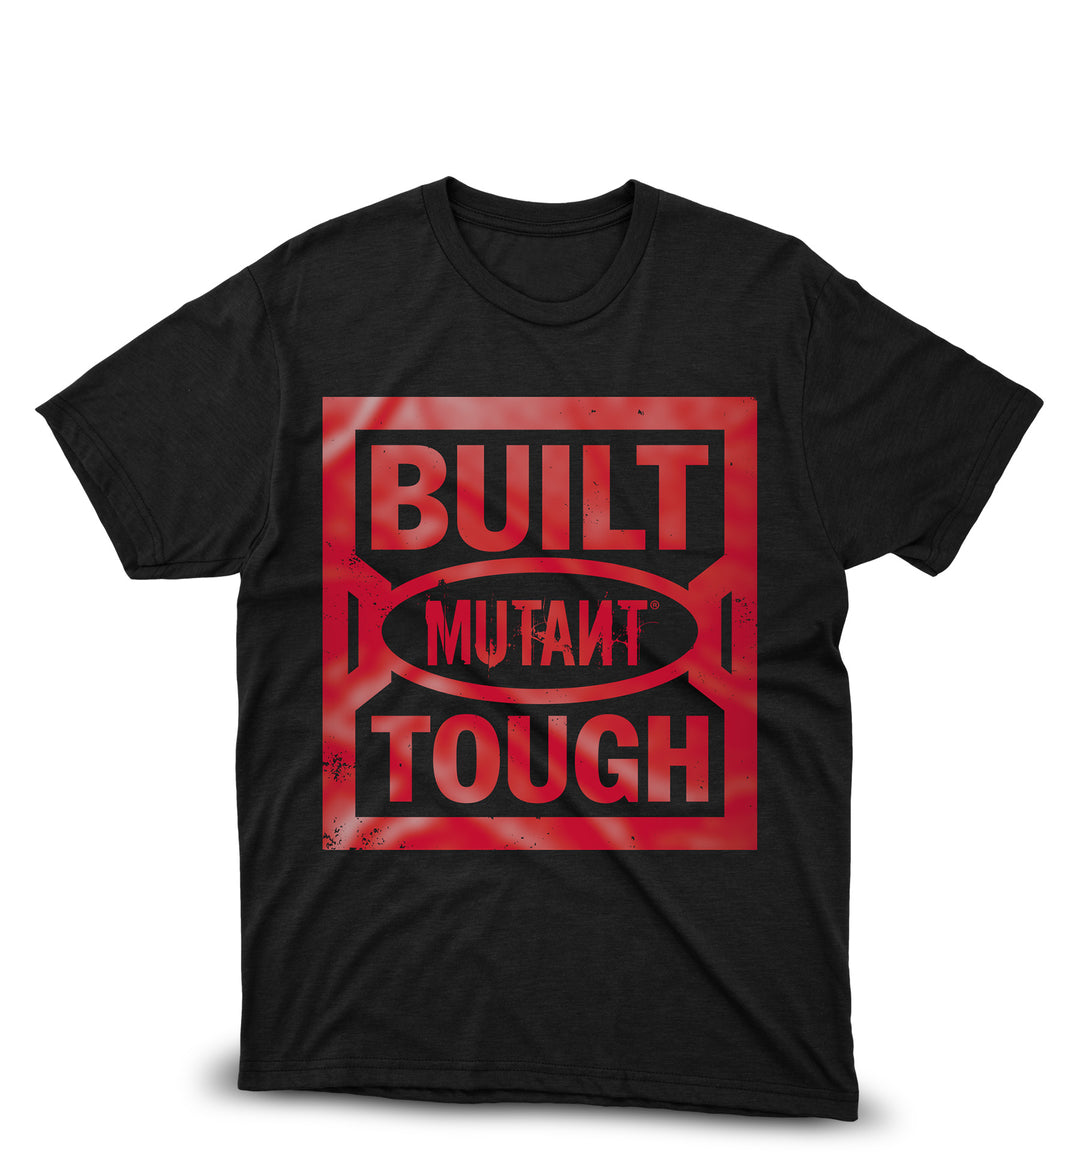 The front view of the black 'MUTANT's Truck Month' t-shirt featuring the phrase 'Built Mutant Tough' in red letters, displayed against a white background.